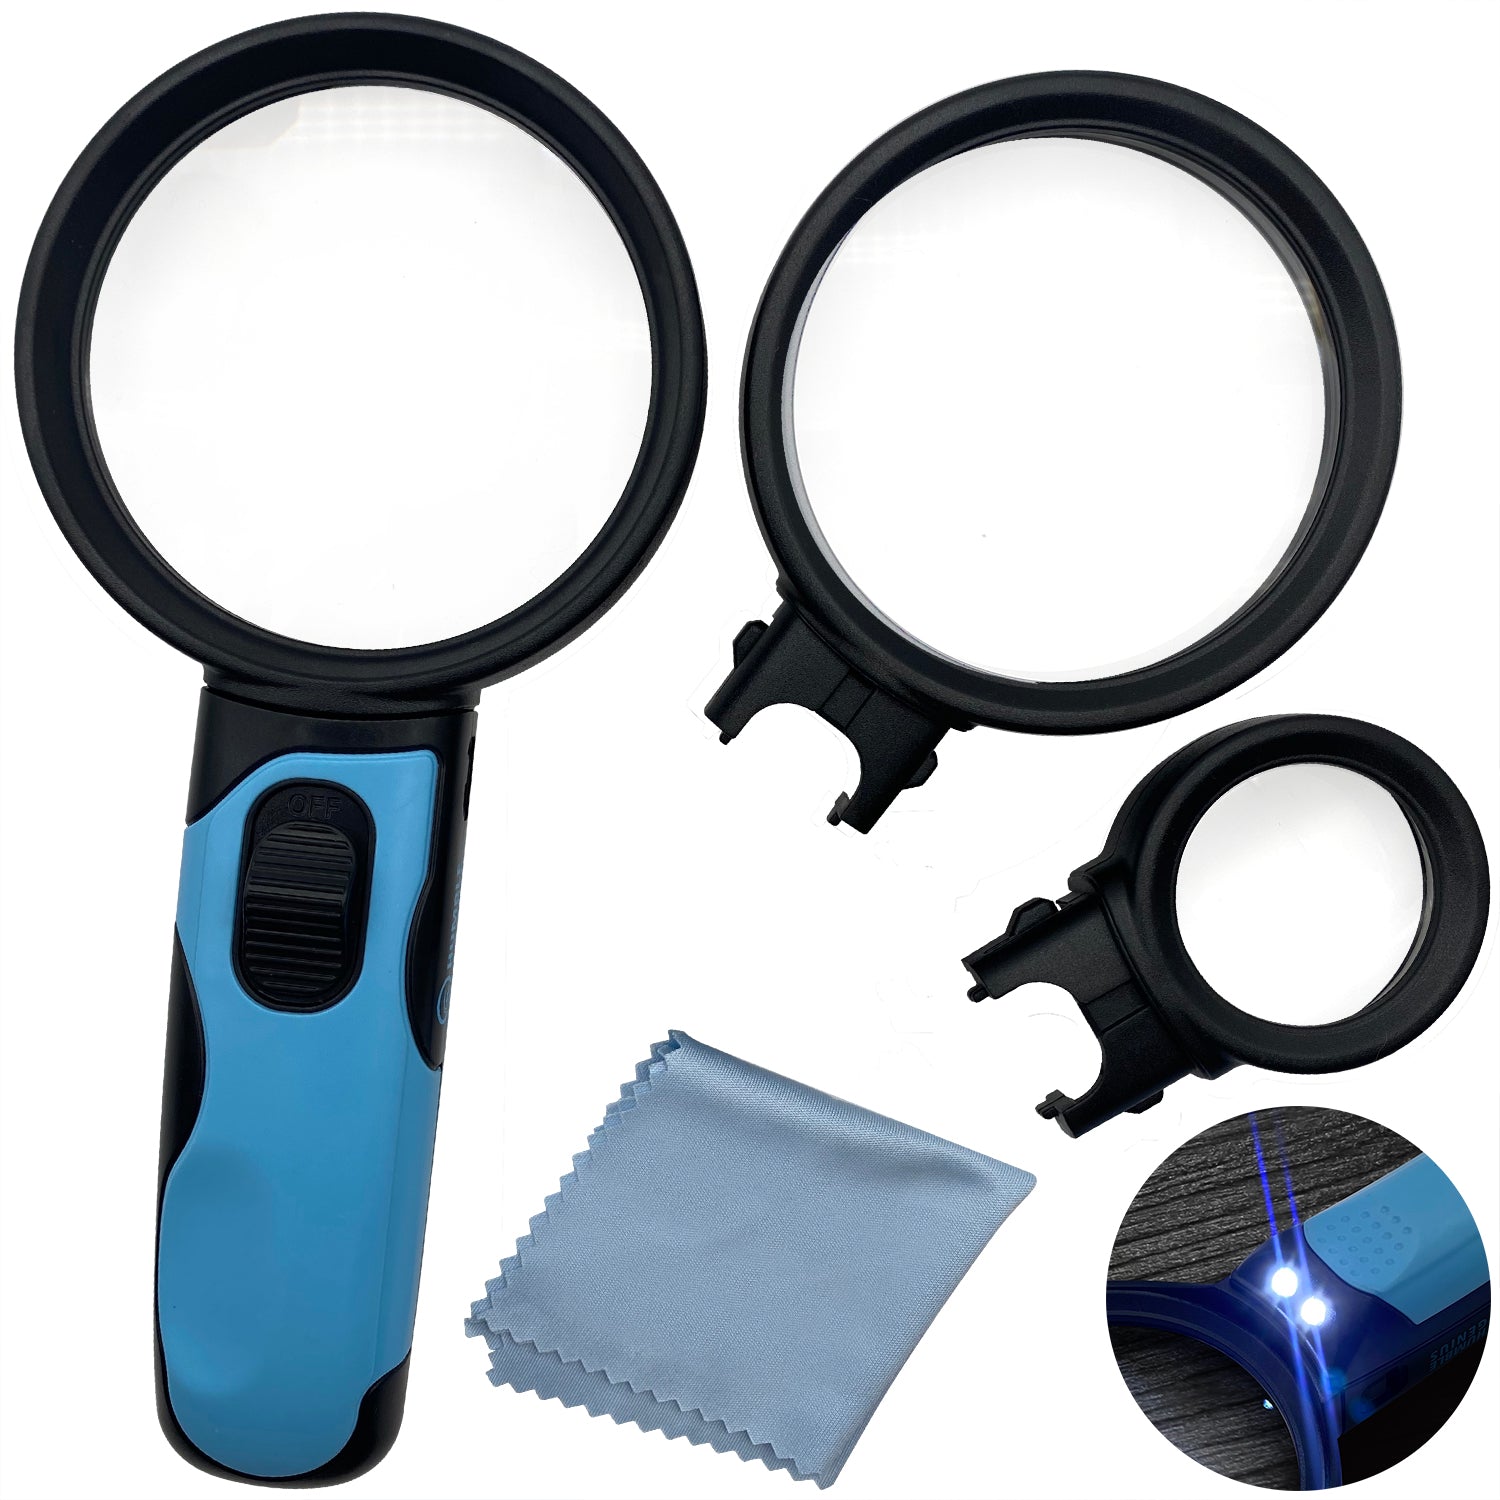 Buy Large Magnifying Glass With Light And Stand online